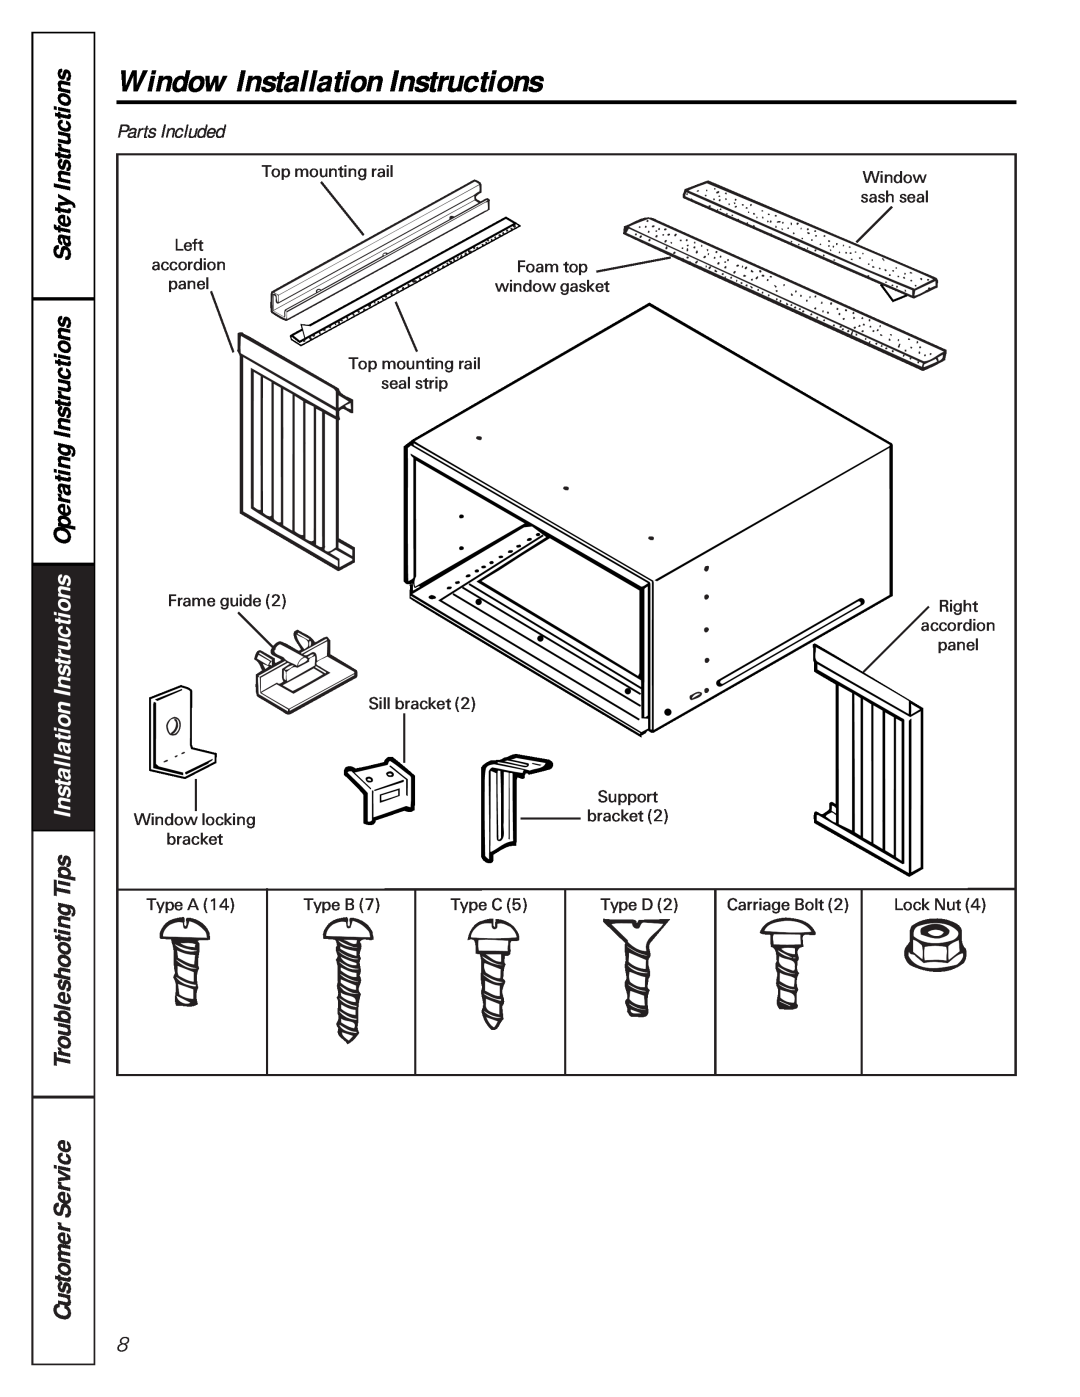 GE agv18, agp18 owner manual Window Installation Instructions, Parts Included, CustomerService 